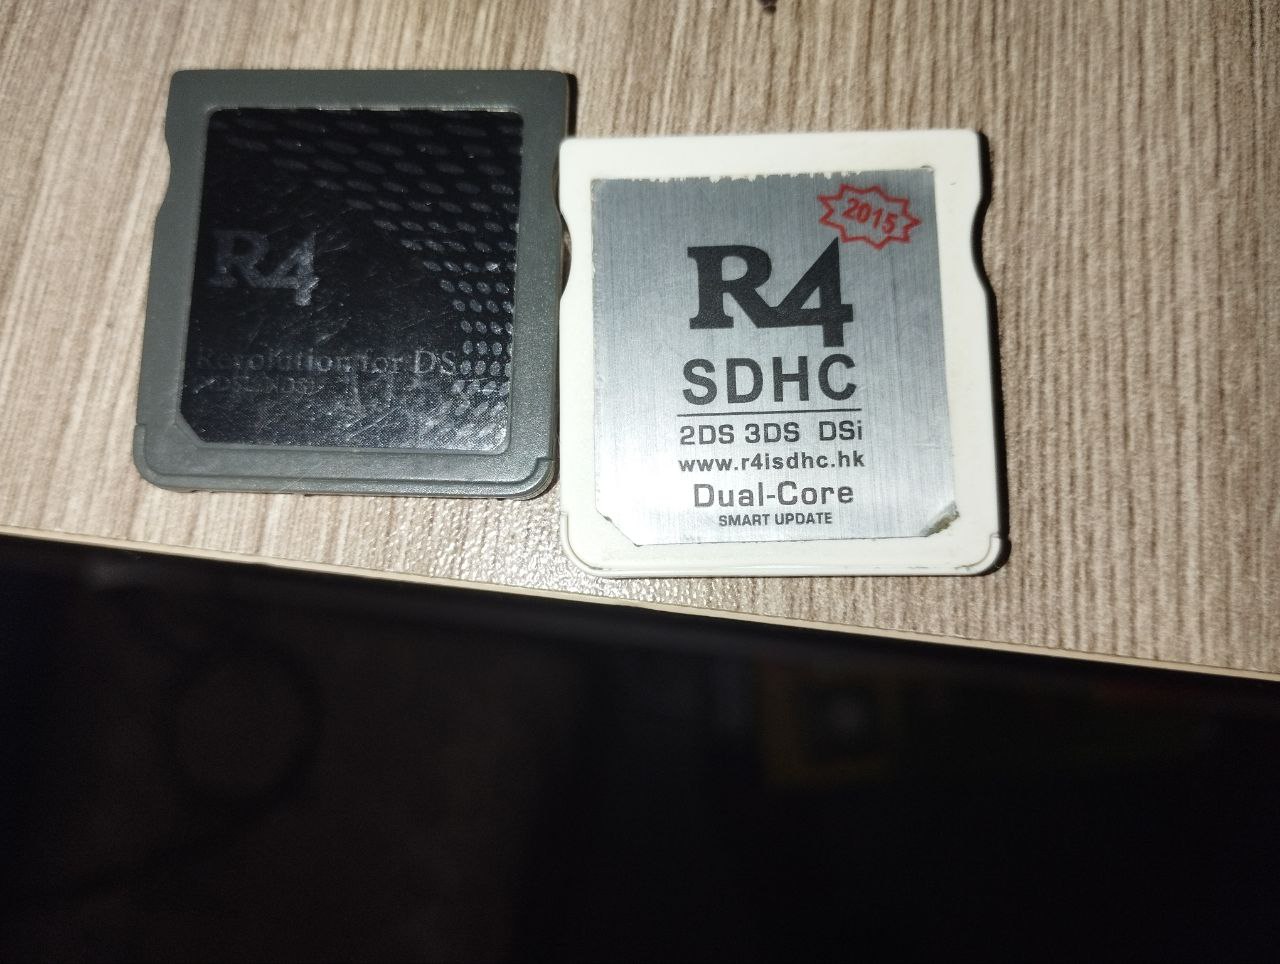 DS Flash Cards : R4 SDHC R4DS R4i DSi DStwo